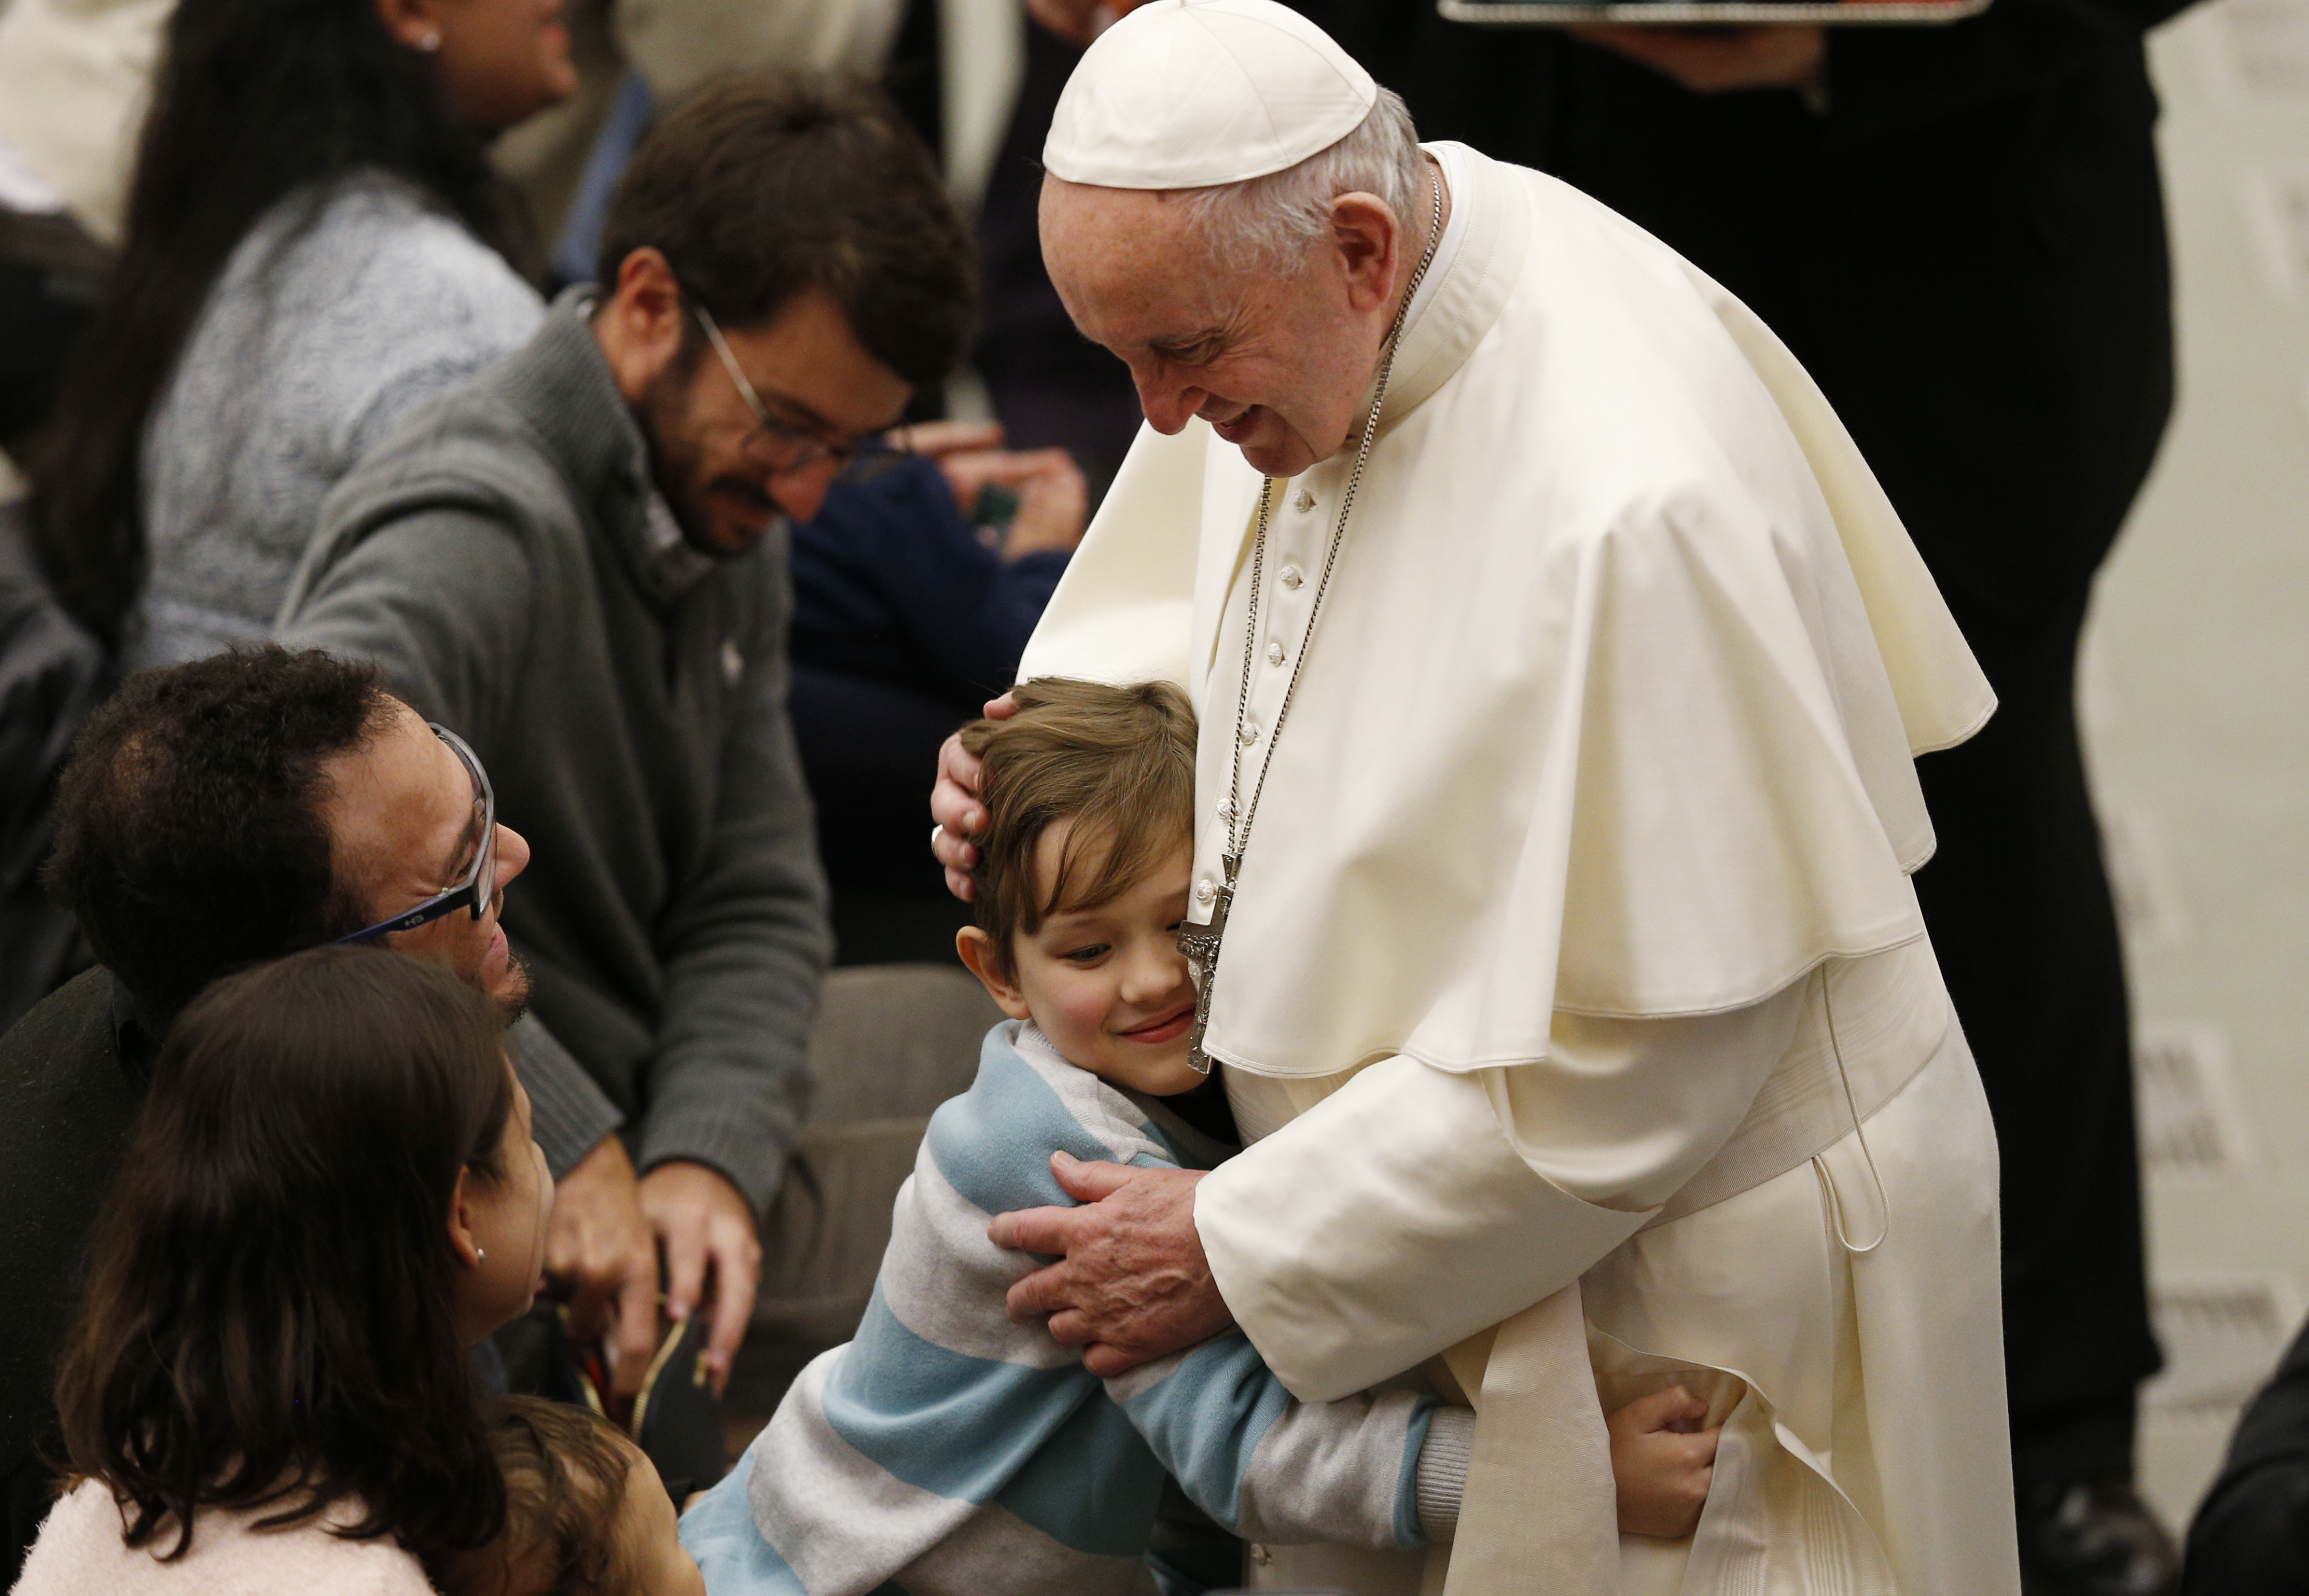 Prayer has the power to change lives and hearts, pope says